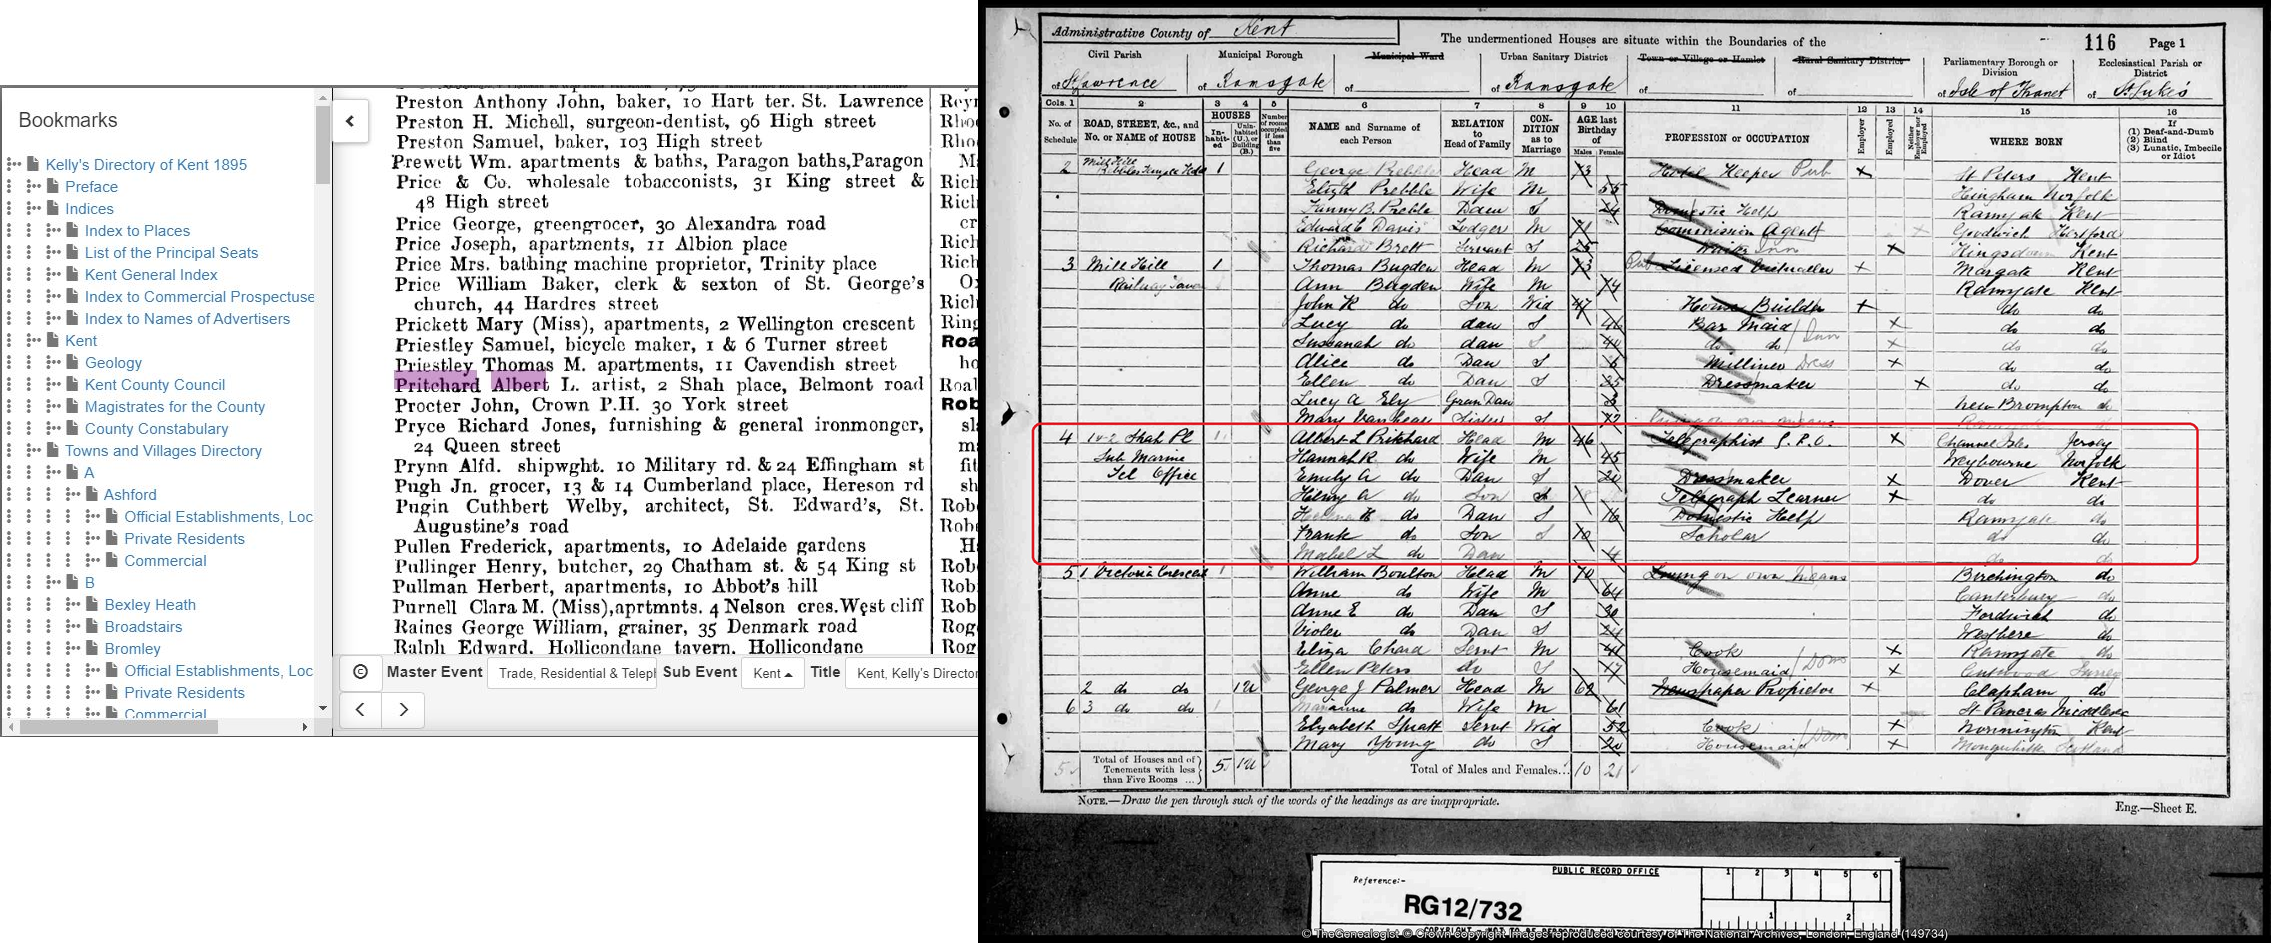 1891 census records Albert at the Submarine Telegraph Office in Shah Place while the Kelly's Directory on
		TheGenealogist lists him as an artist at the same address